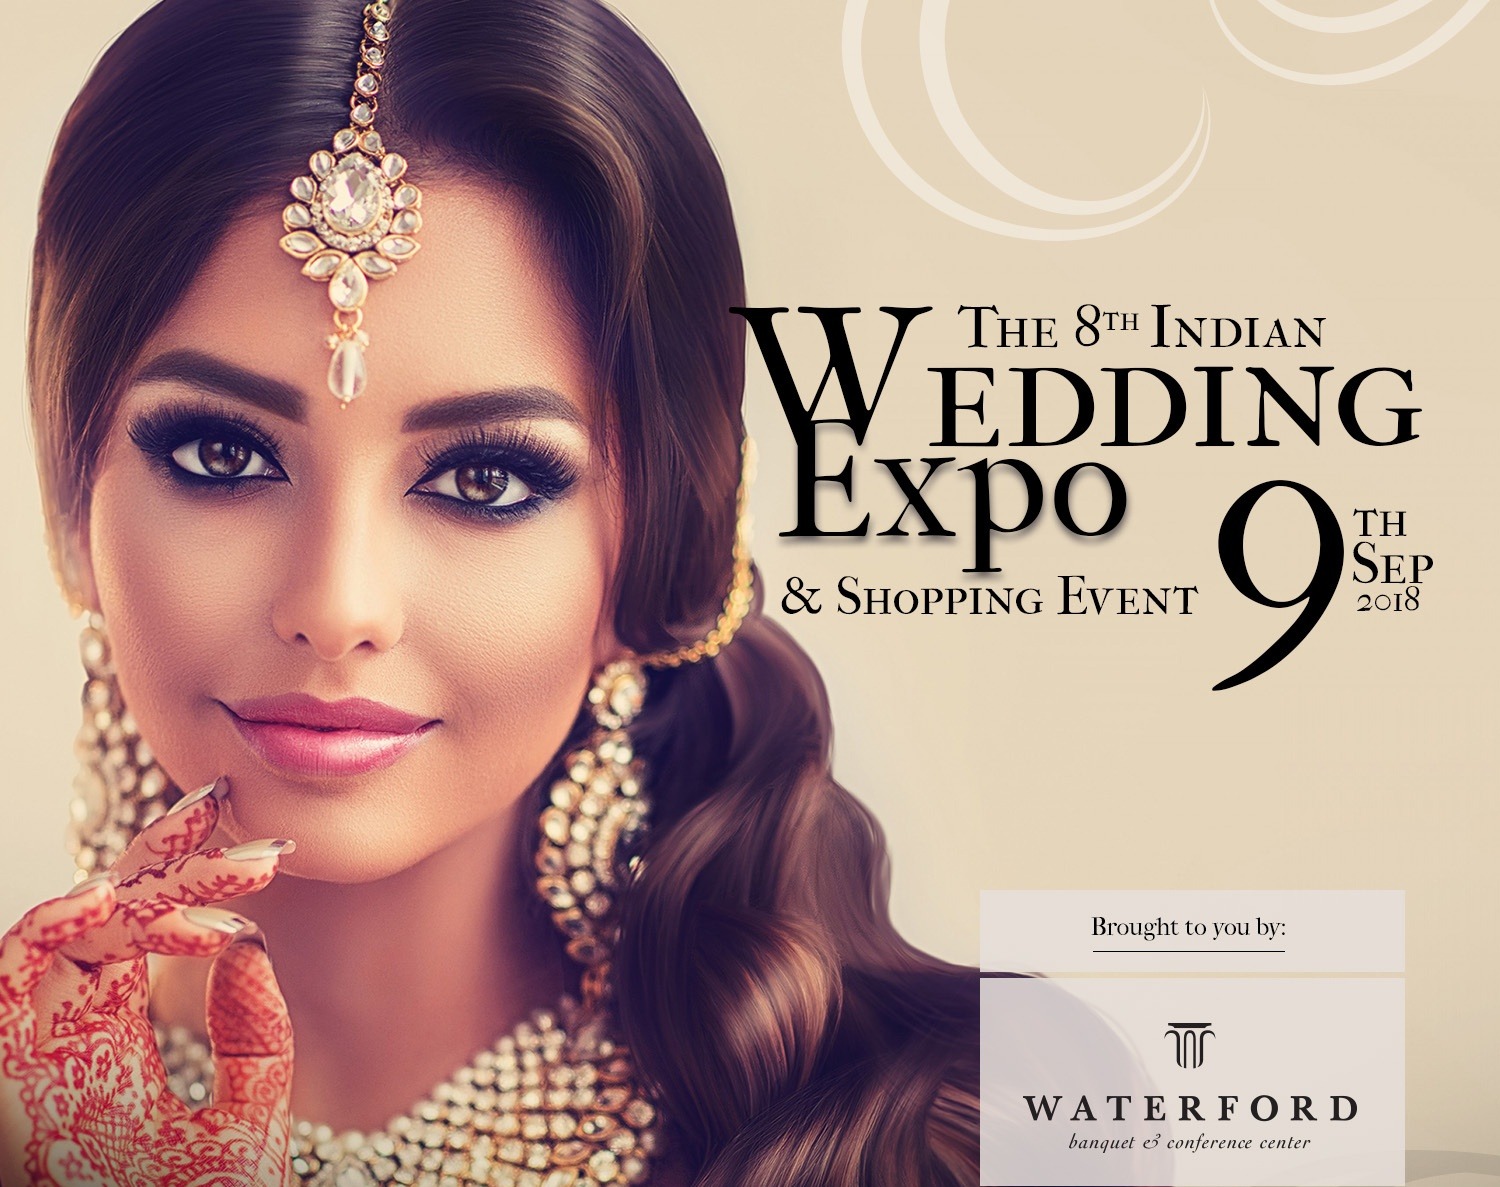 The 8th Indian Wedding Expo & Shopping Event Waterford Banquet